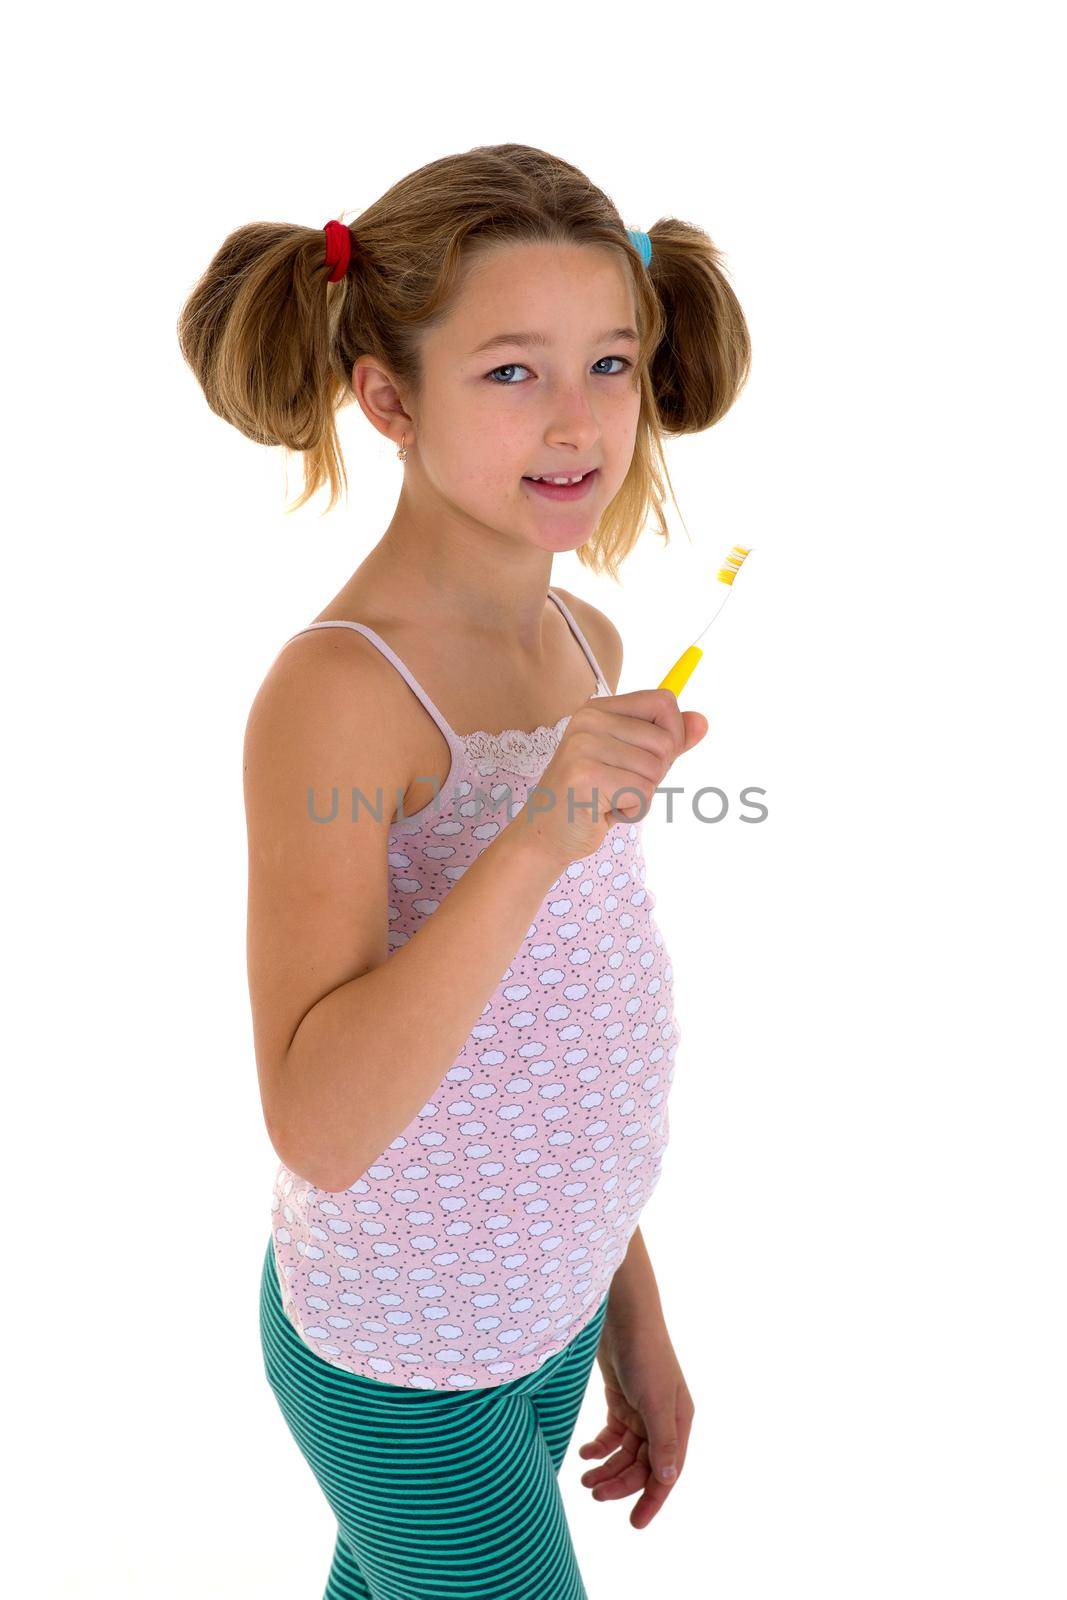 Smiling girl standing with toothbrush in her hands. Preteen girl brushing her teeth before or after sleeping. Cute child daily routine concept